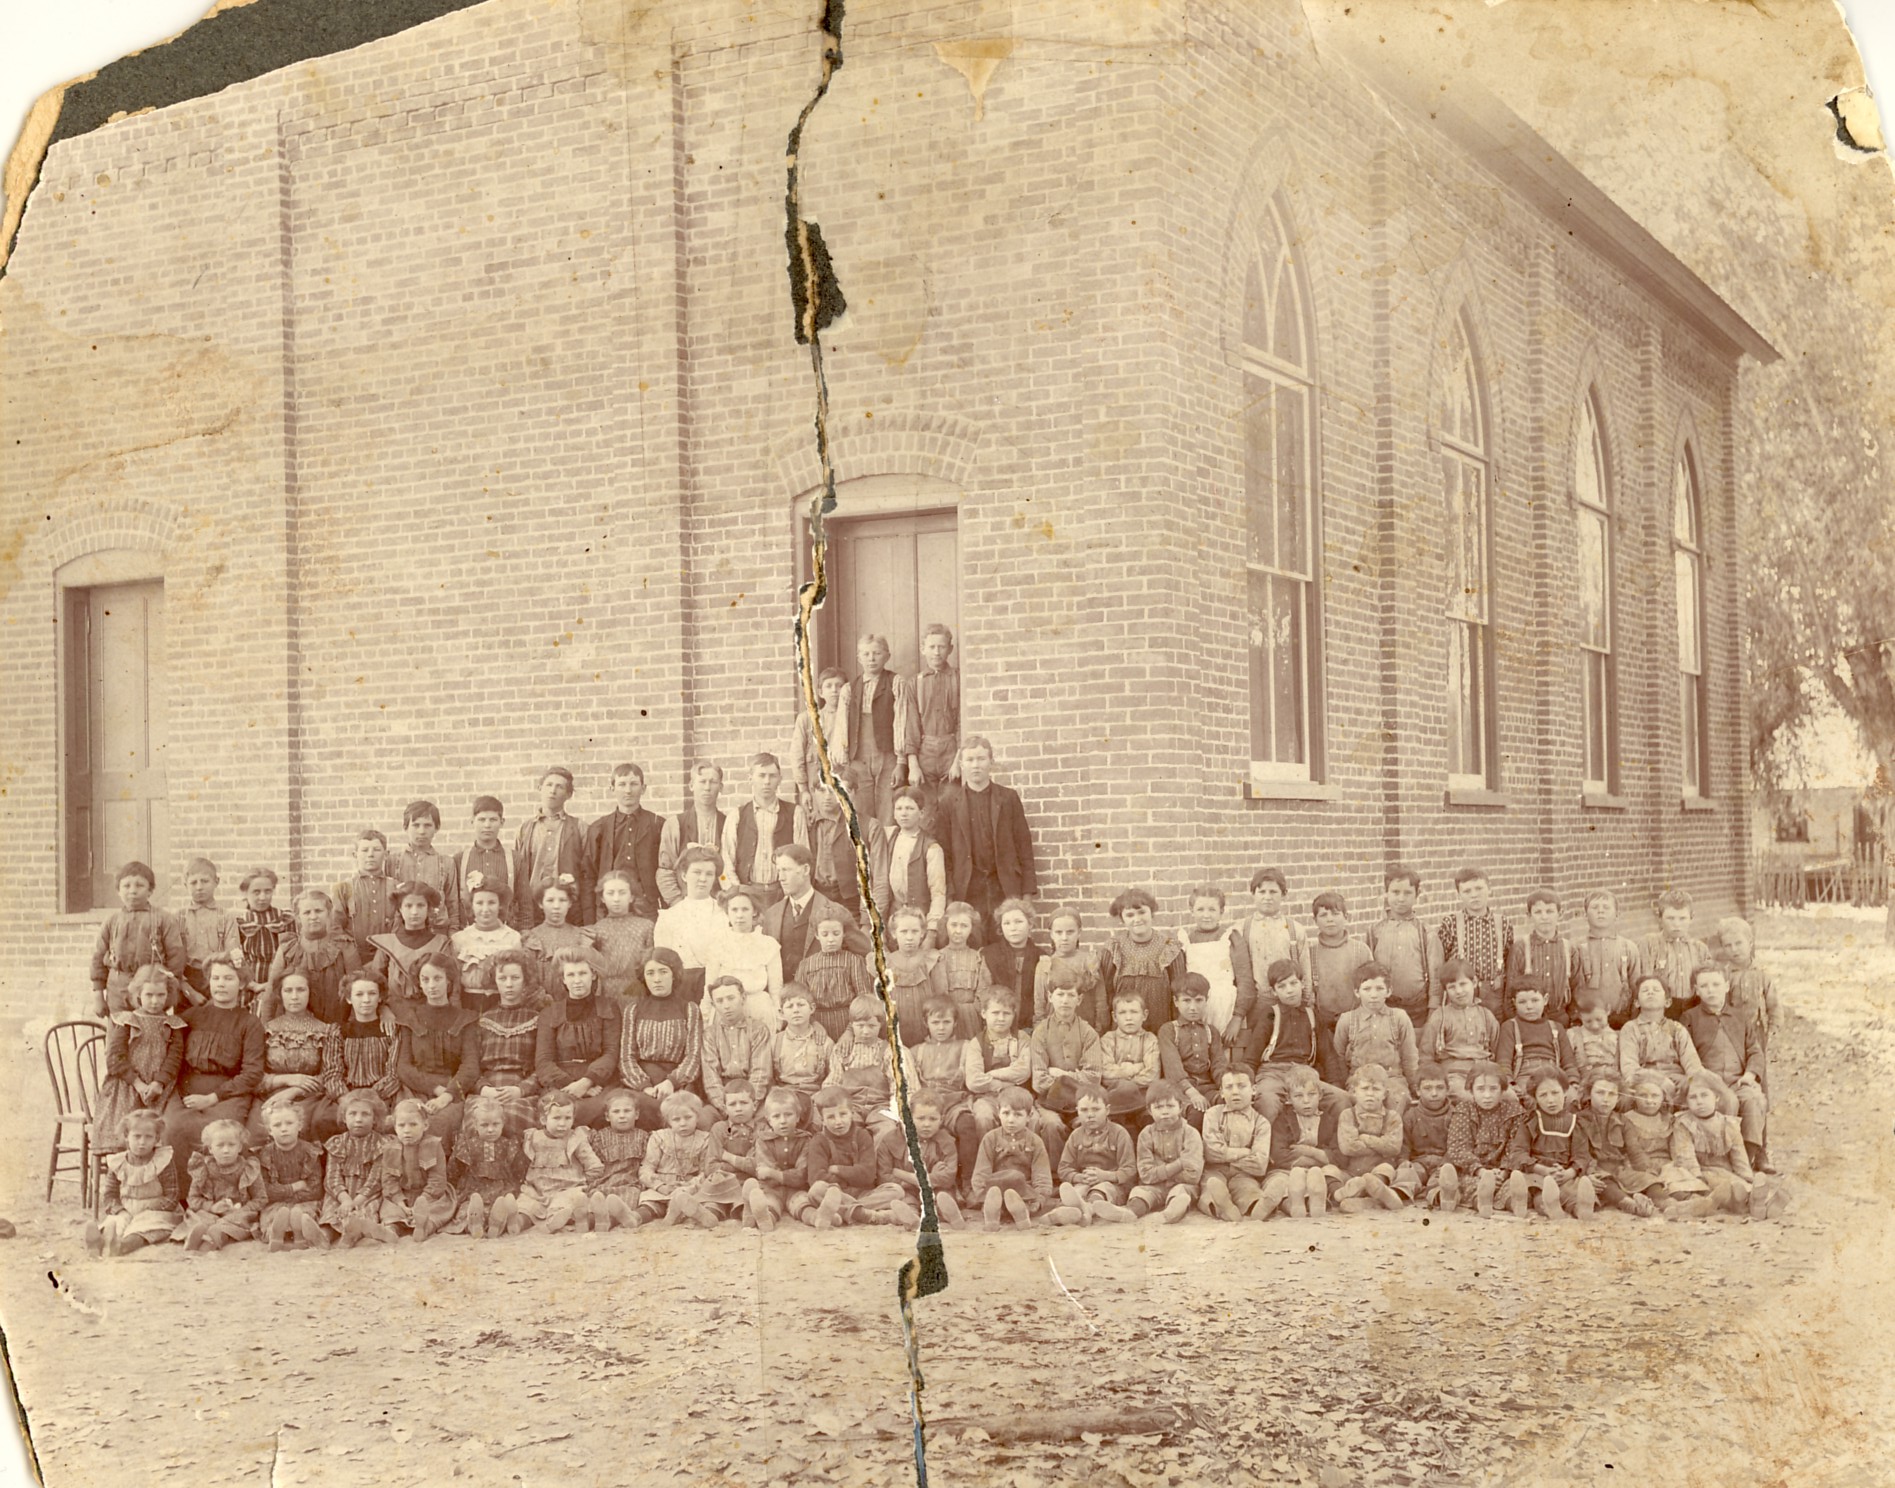 WCHS-00368 Large group of people in front of a brick building